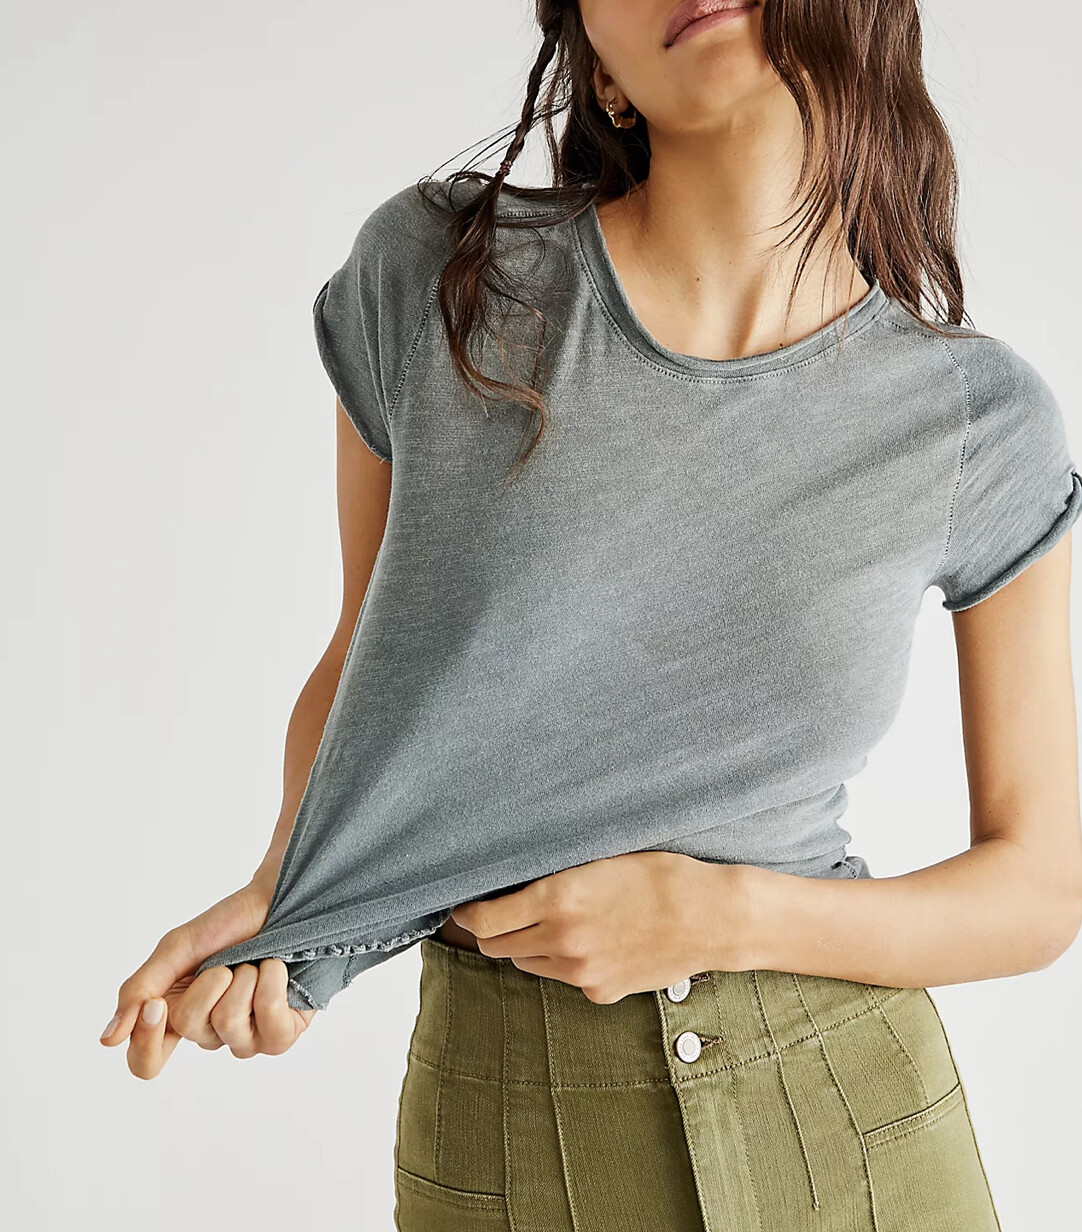 Free People - Be My Baby Top in Army